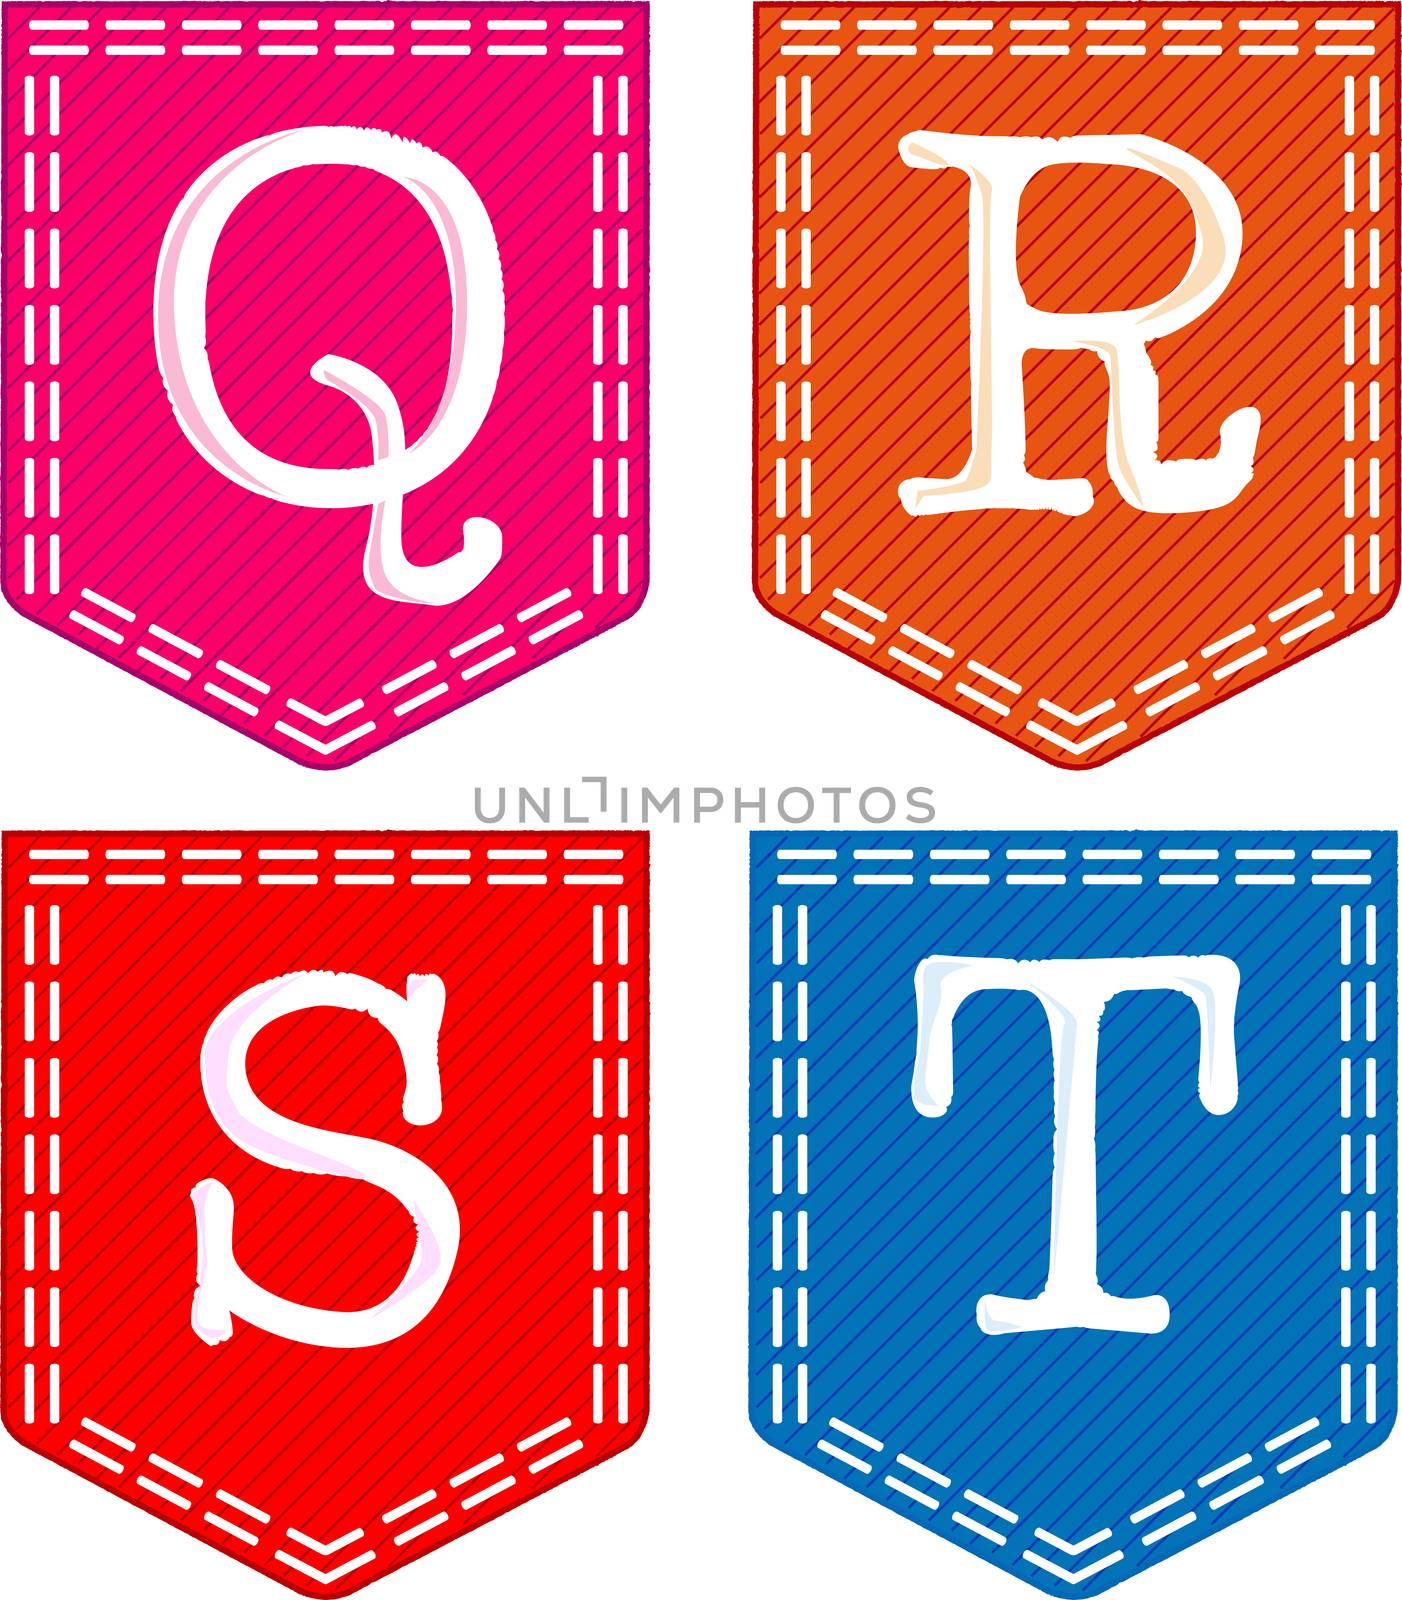 Four letters, Q, R, S, and T, sewn into a fabric pocket.